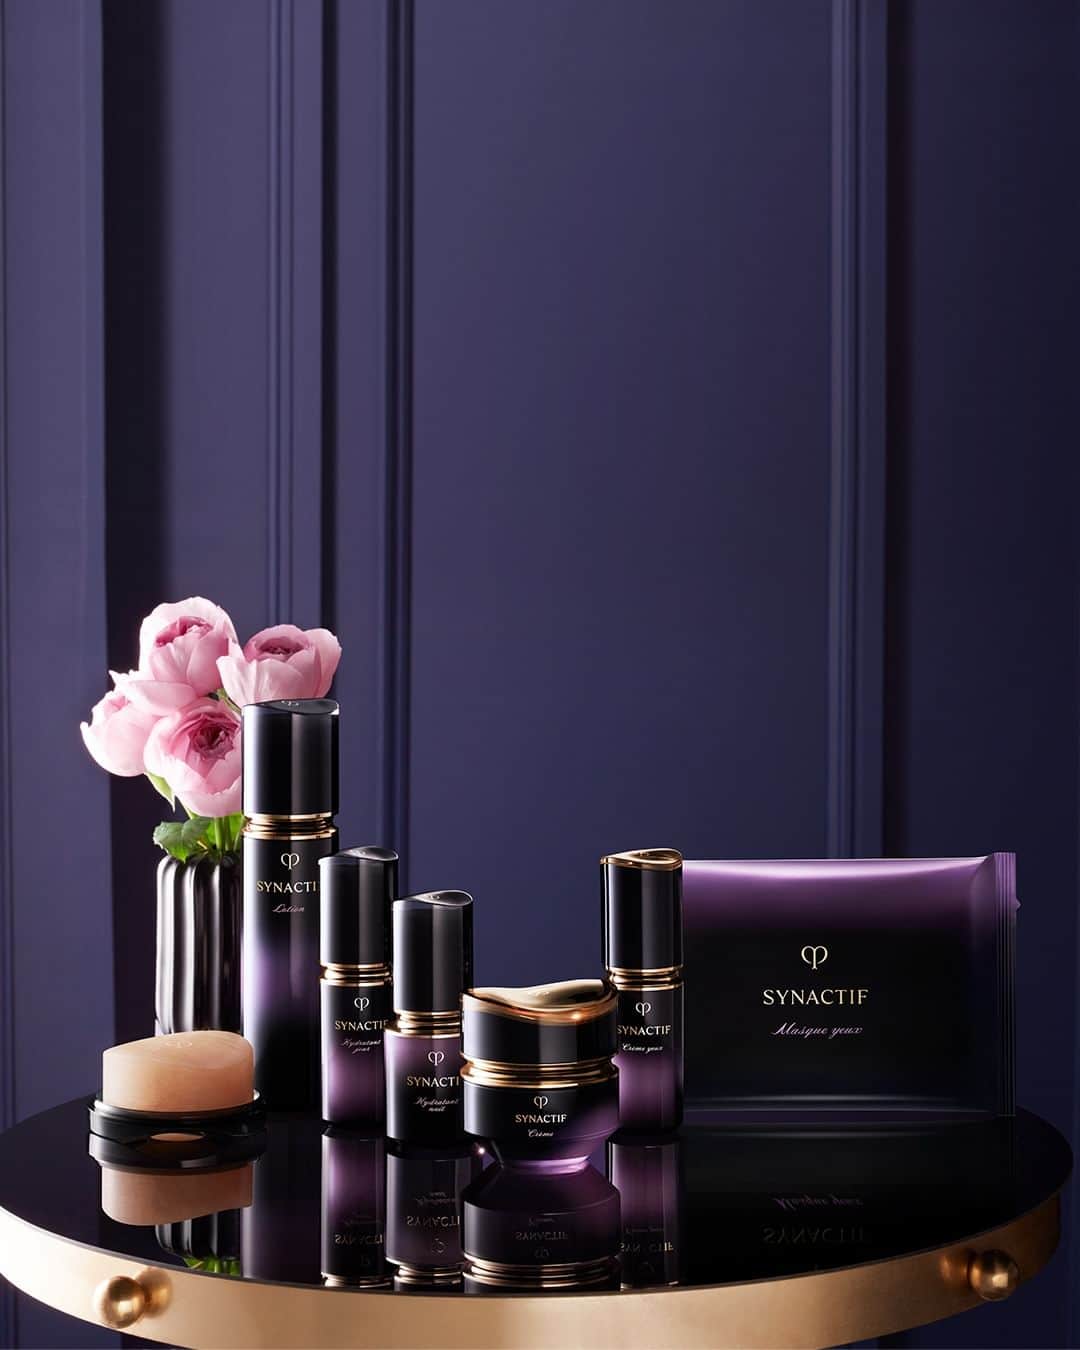 Clé de Peau Beauté Officialのインスタグラム：「Now you can treat yourself to a luxurious spa treatment in the comfort of your own home. Inspired by detoxifying spa treatments, #Synactif is a holistic range of products designed to pamper your skin from day to night. With its combination of advanced skincare technology and powerful natural ingredients, the exquisite Synactif line is your key to radiant, youthful skin, as if you've been treated by the hands of a skilled spa therapist 💆🏽   ご自宅で贅沢なスパトリートメントをお楽しみいただけます。 先進のリンパ管研究をさらに進化させたクレ・ド・ポー ボーテ最高峰ライン #シナクティフ は朝のお手入れと夜のお手入れで、未知の美しさへと導きます。先進のスキンケア研究がついに導きだしたシナクティフだけの成分、ピュリファイングB（保湿・整肌）*を配合。厳選された植物成分を効果的に組み合わせたシナクティフシリーズは、生命の輝きにあふれた、鮮明な顔立ち印象を目指します💆🏽  *（桑白皮エキス、ケイ皮エキス、オドリコソウエキス、MPC コポリマー、ラウリルジメチルアミノ酢酸ベタイン、イソステアリン酸、グリセリン、キシリトール、PEG/PPG-17/4 ジメチルエーテル、アセチル化ヒアルロン酸ナトリウム、トリメチルグリシン）」